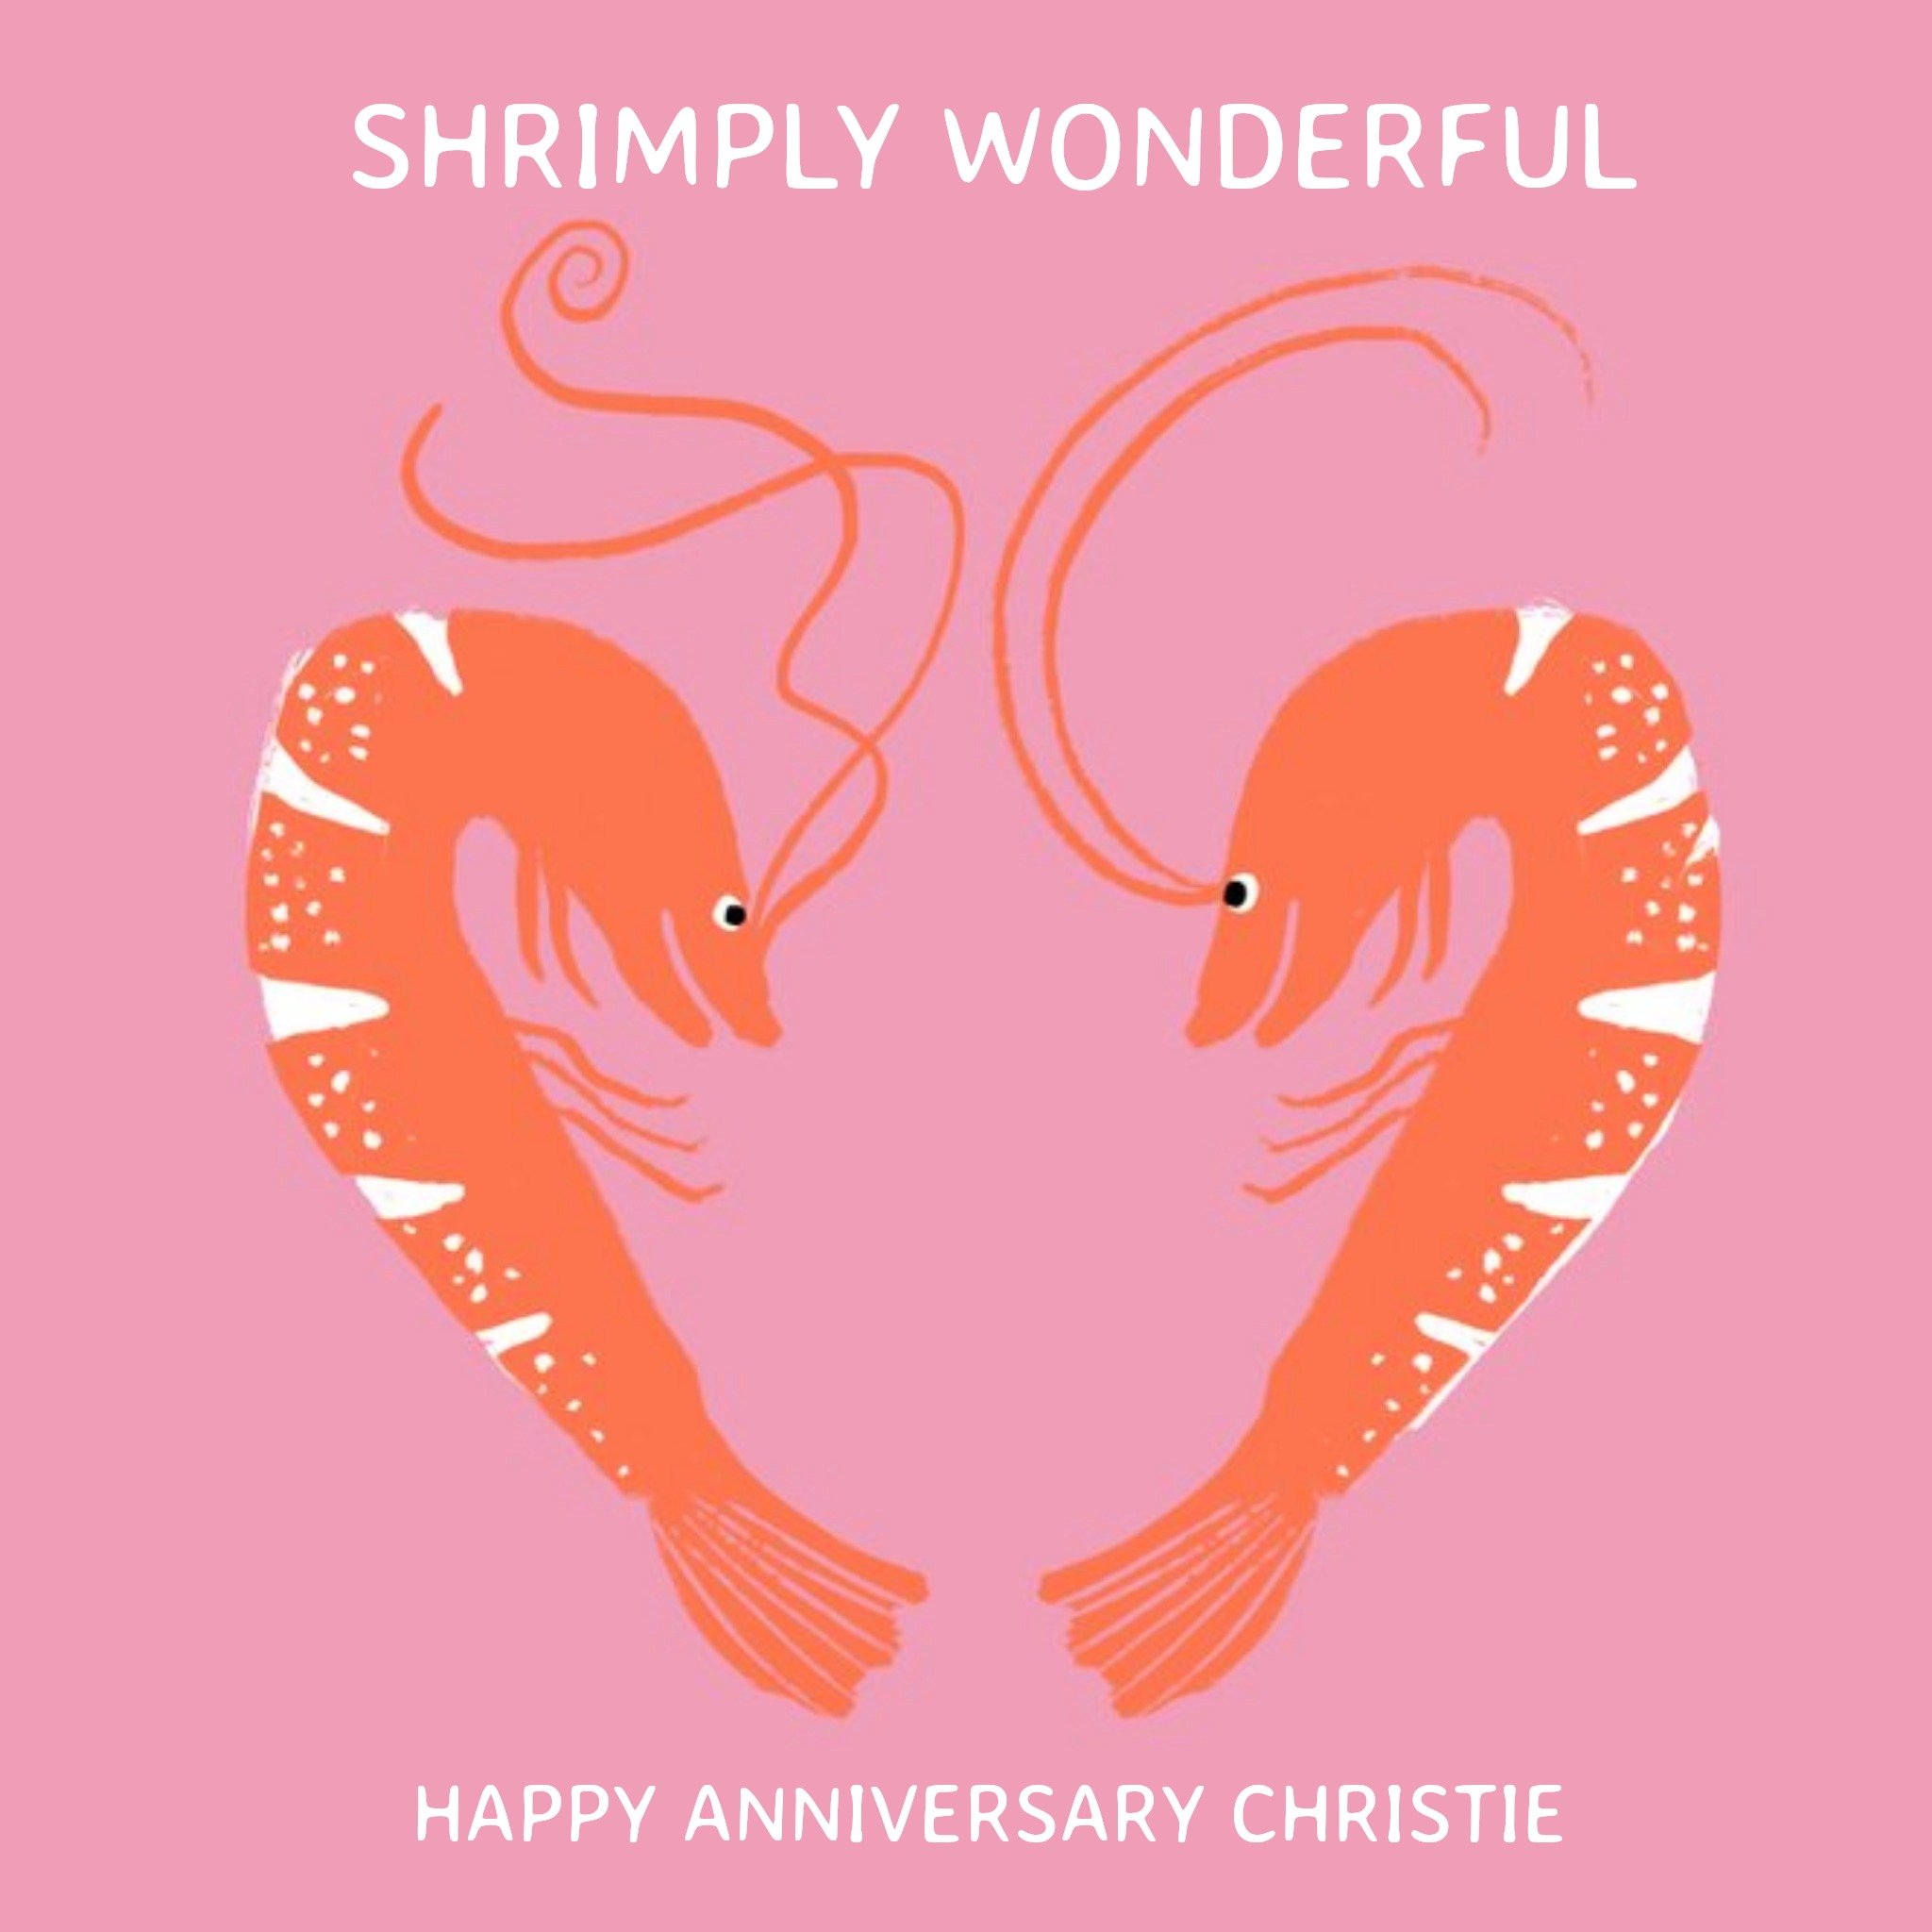 Moonpig Illustration Of A Pair Of Shrimps In The Shape Of A Love Heart Anniversary Card, Large